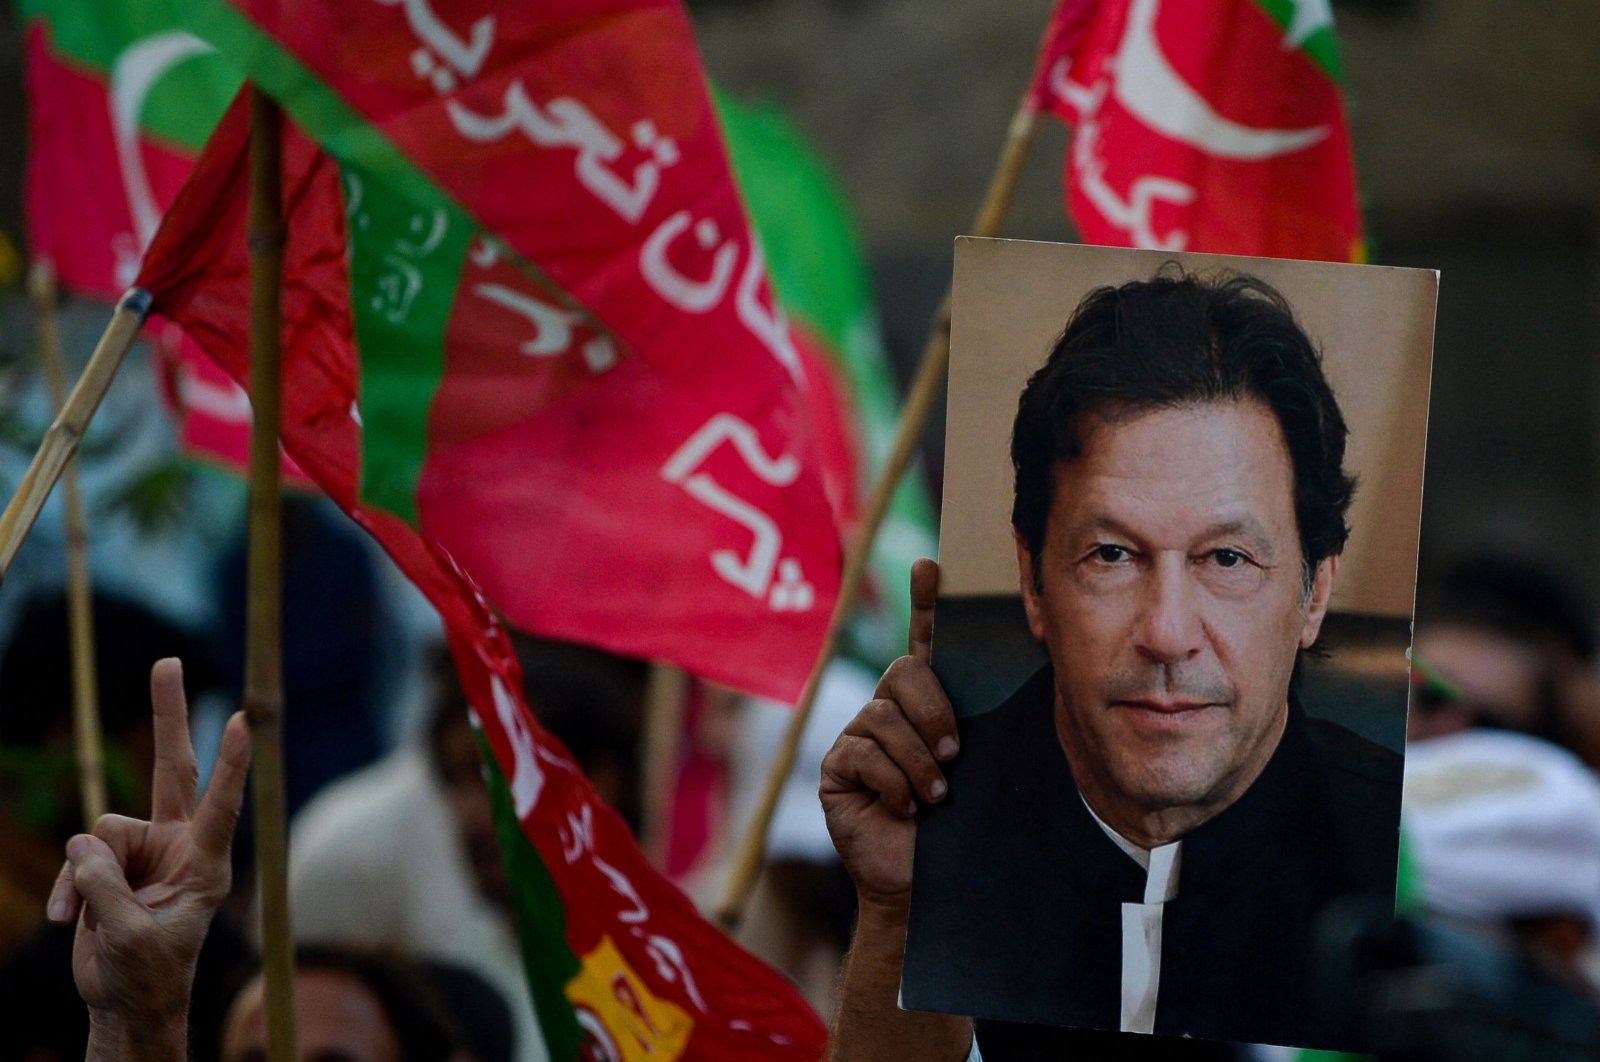 An activist of the Pakistan Tehreek-e-Insaf (PTI) holds a portrait of former Prime Minister Imran Khan at a rally in Karachi, Pakistan, Oct. 28, 2022. (AFP Photo)